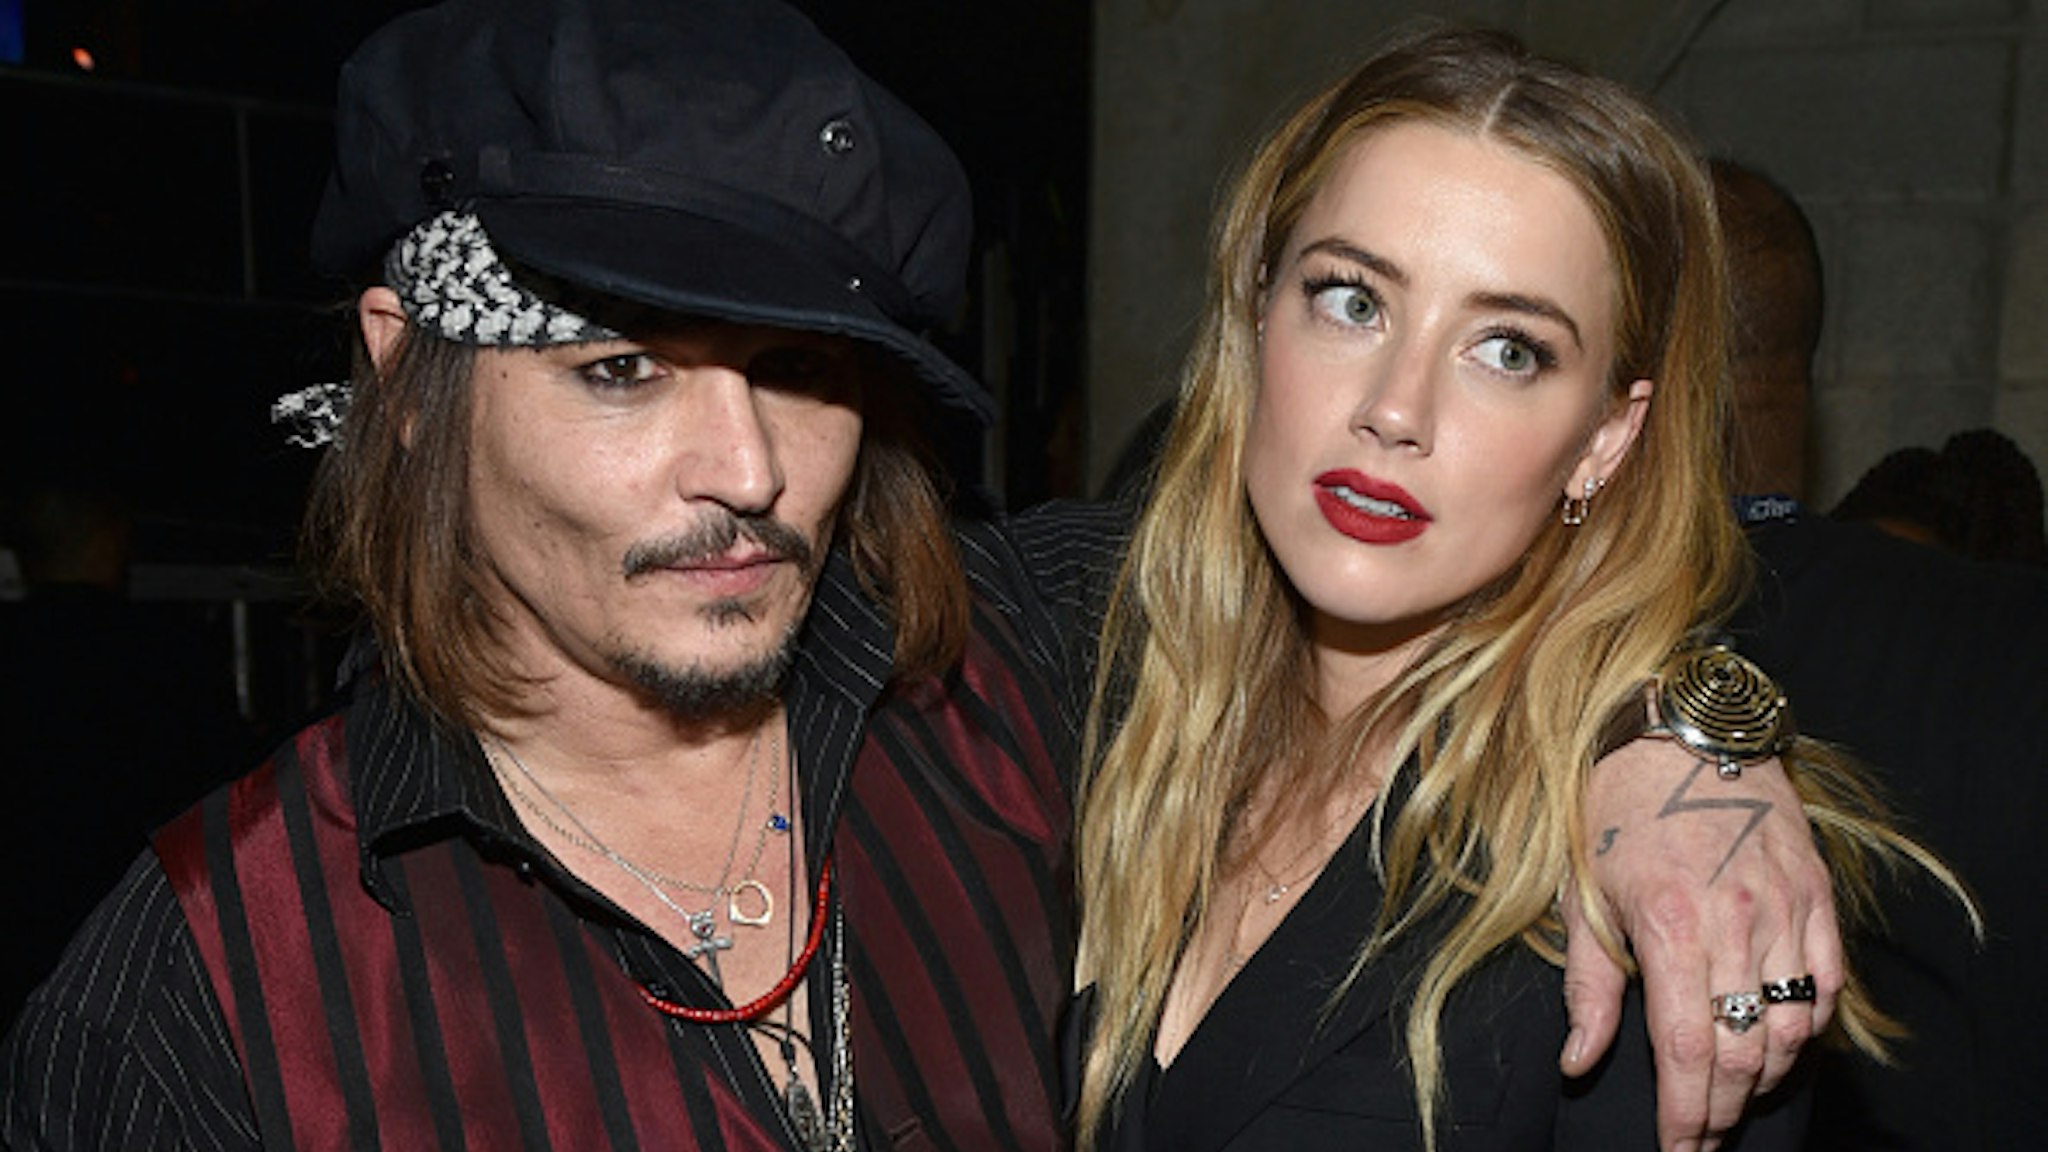 LOS ANGELES, CA - FEBRUARY 15: Actor/musician Johnny Depp (L) and actress Amber Heard attend The 58th GRAMMY Awards at Staples Center on February 15, 2016 in Los Angeles, California.